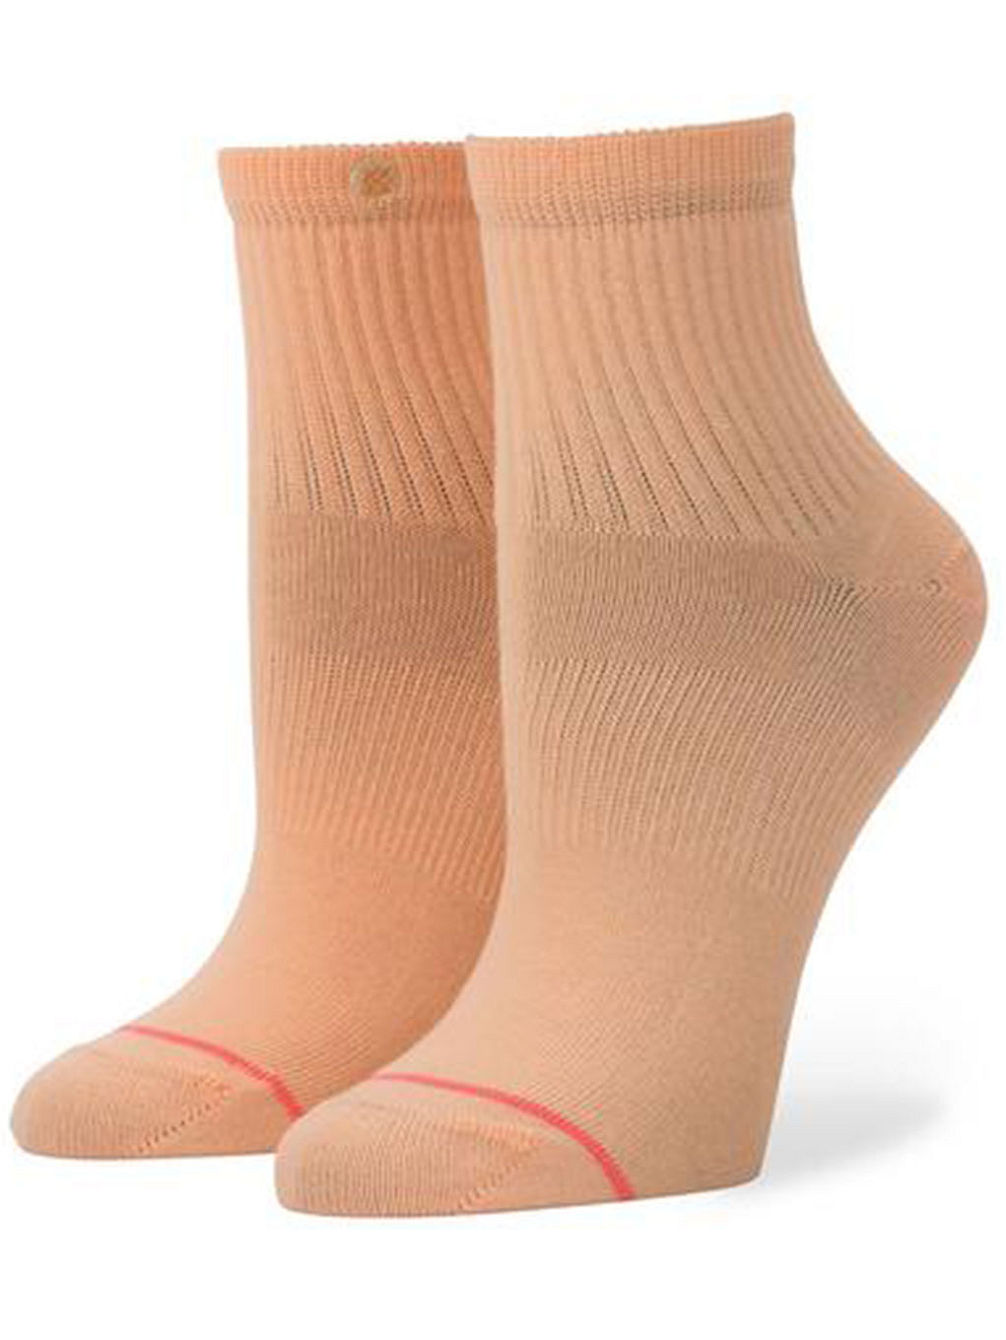 Uncommon Classic Lowrider Chaussettes